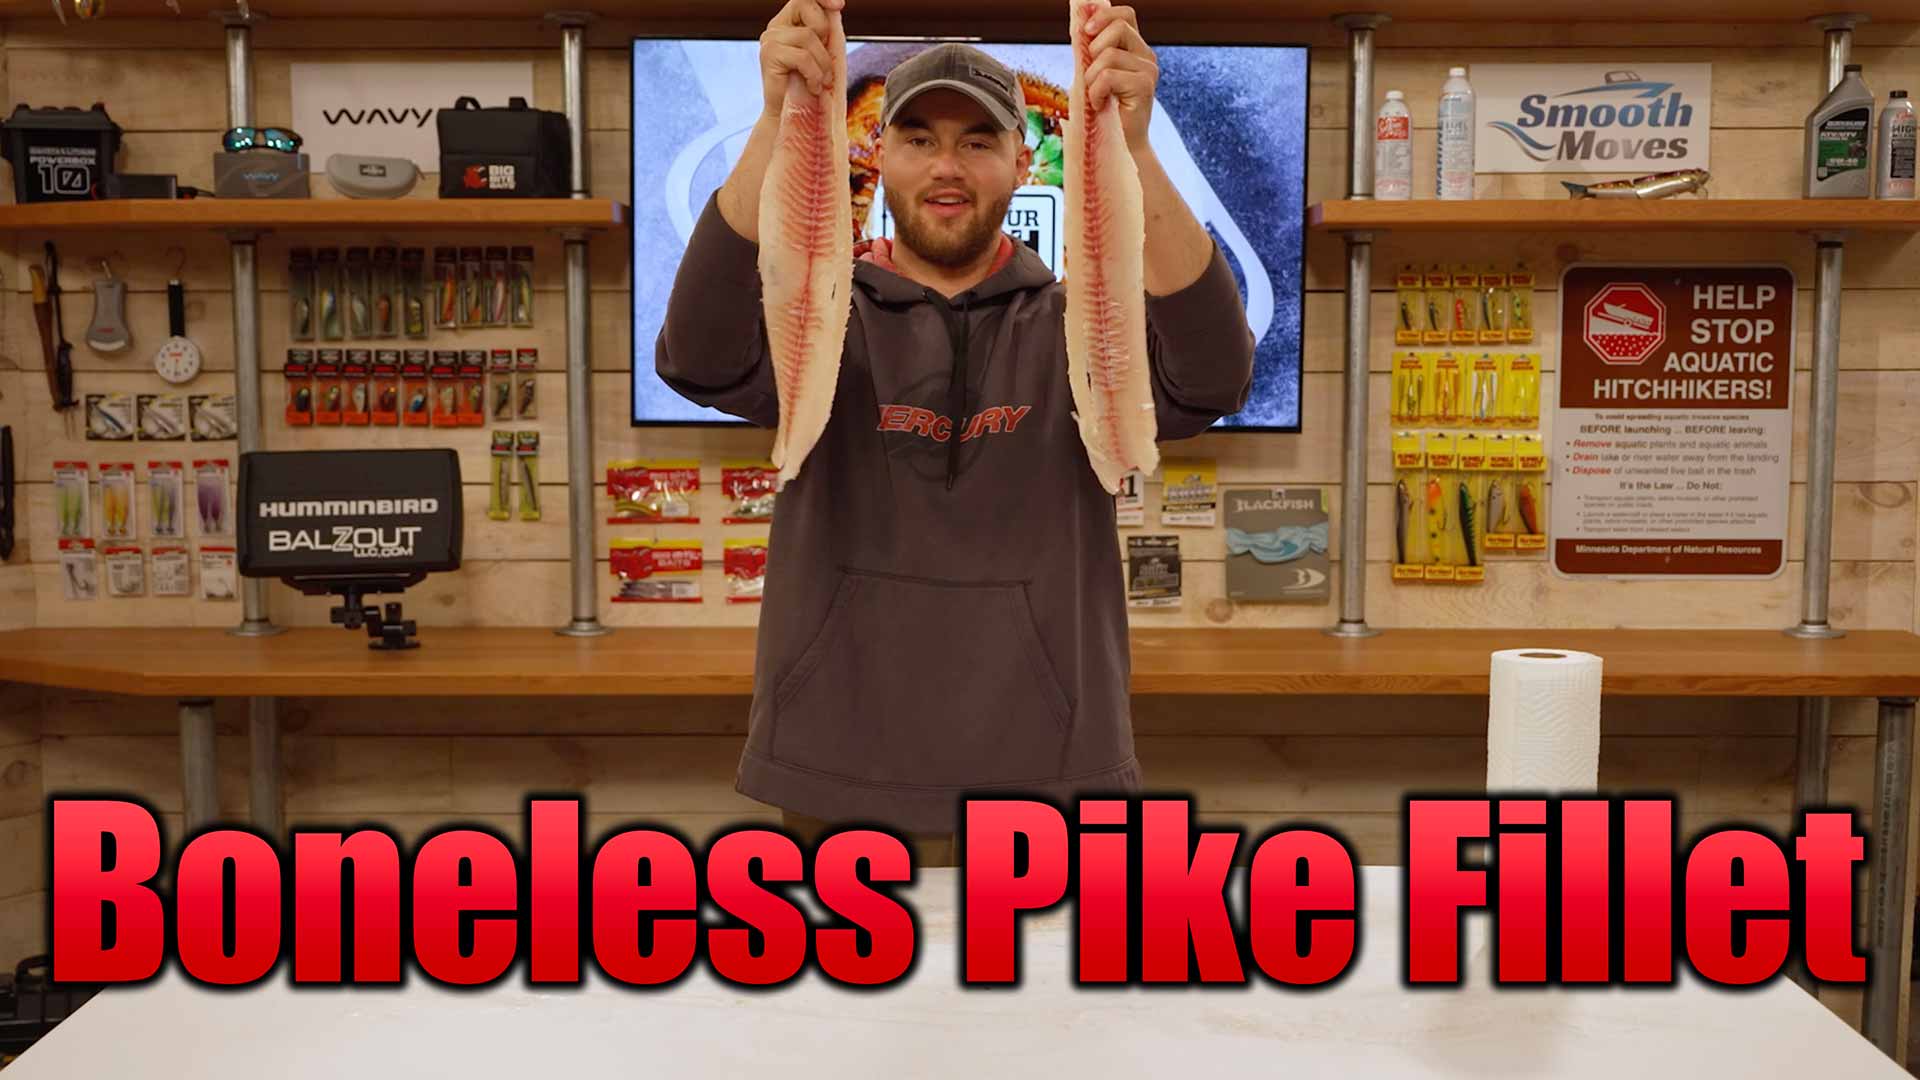 filleting northern pike